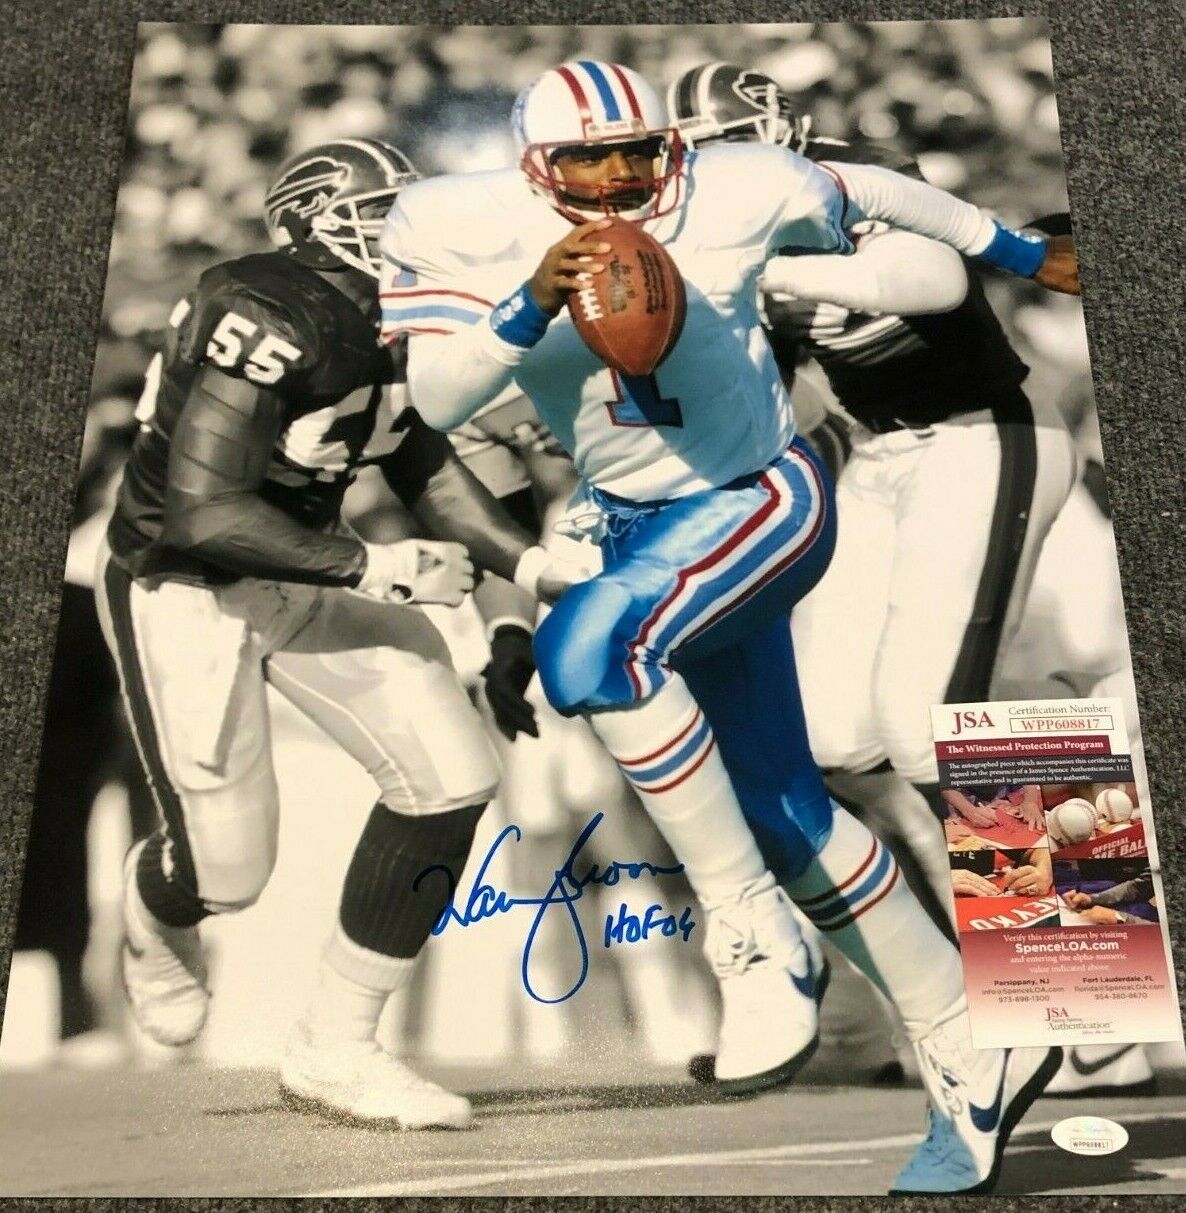 MVP Authentics Houston Oilers Warren Moon Autographed Signed Inscribed 16X20 Photo Jsa Coa 80.10 sports jersey framing , jersey framing